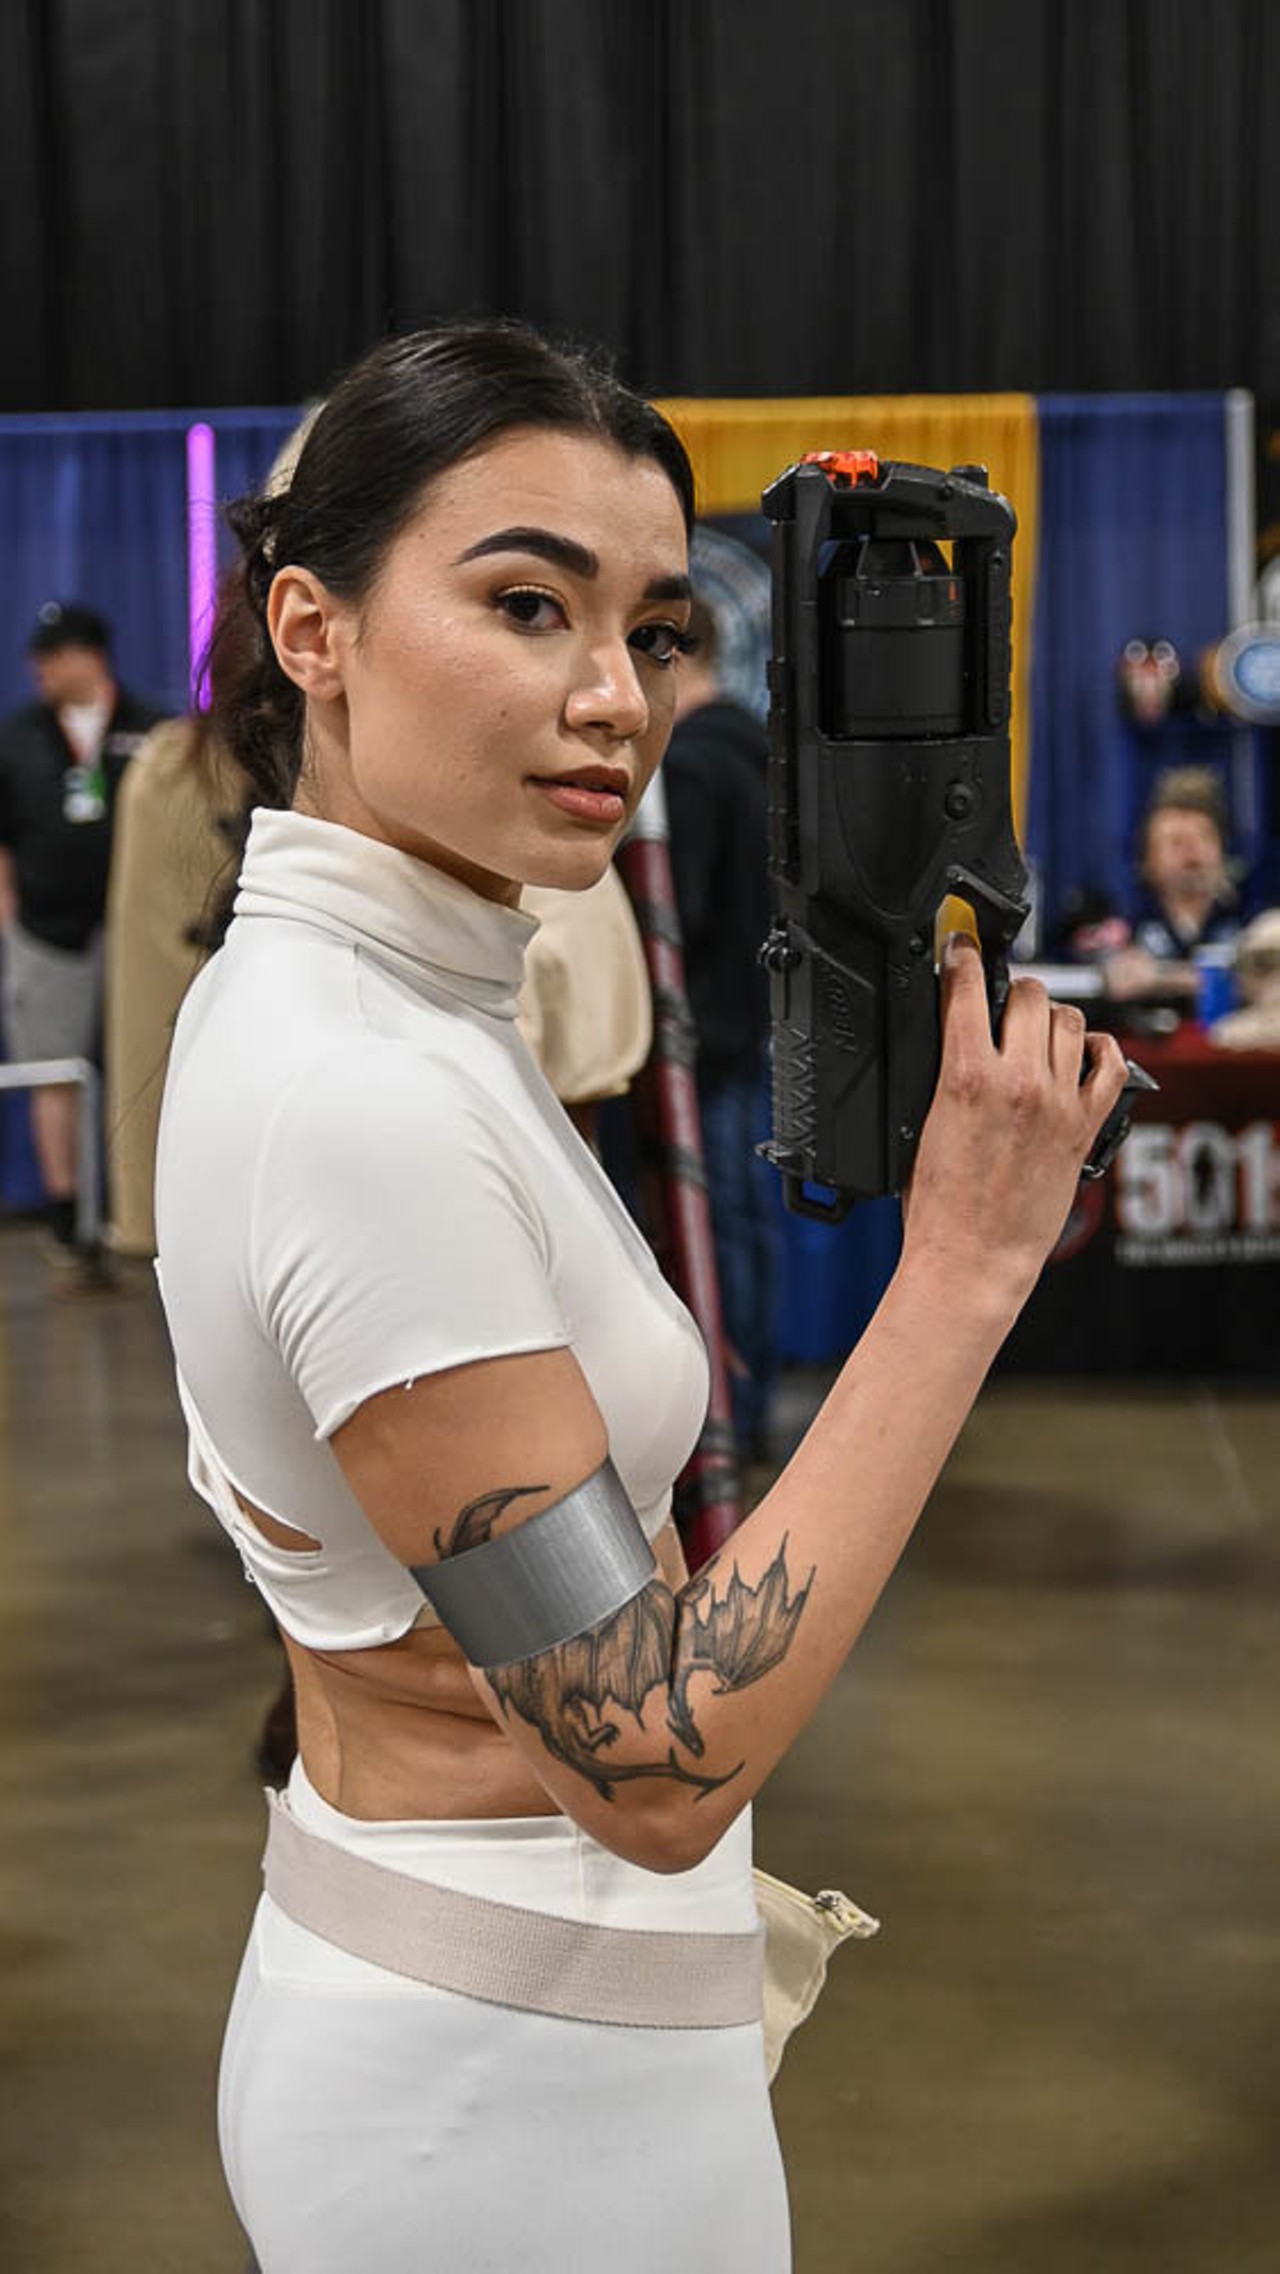 Cosplayers assemble at Motor City Comic Con 2023 [PHOTOS] Detroit